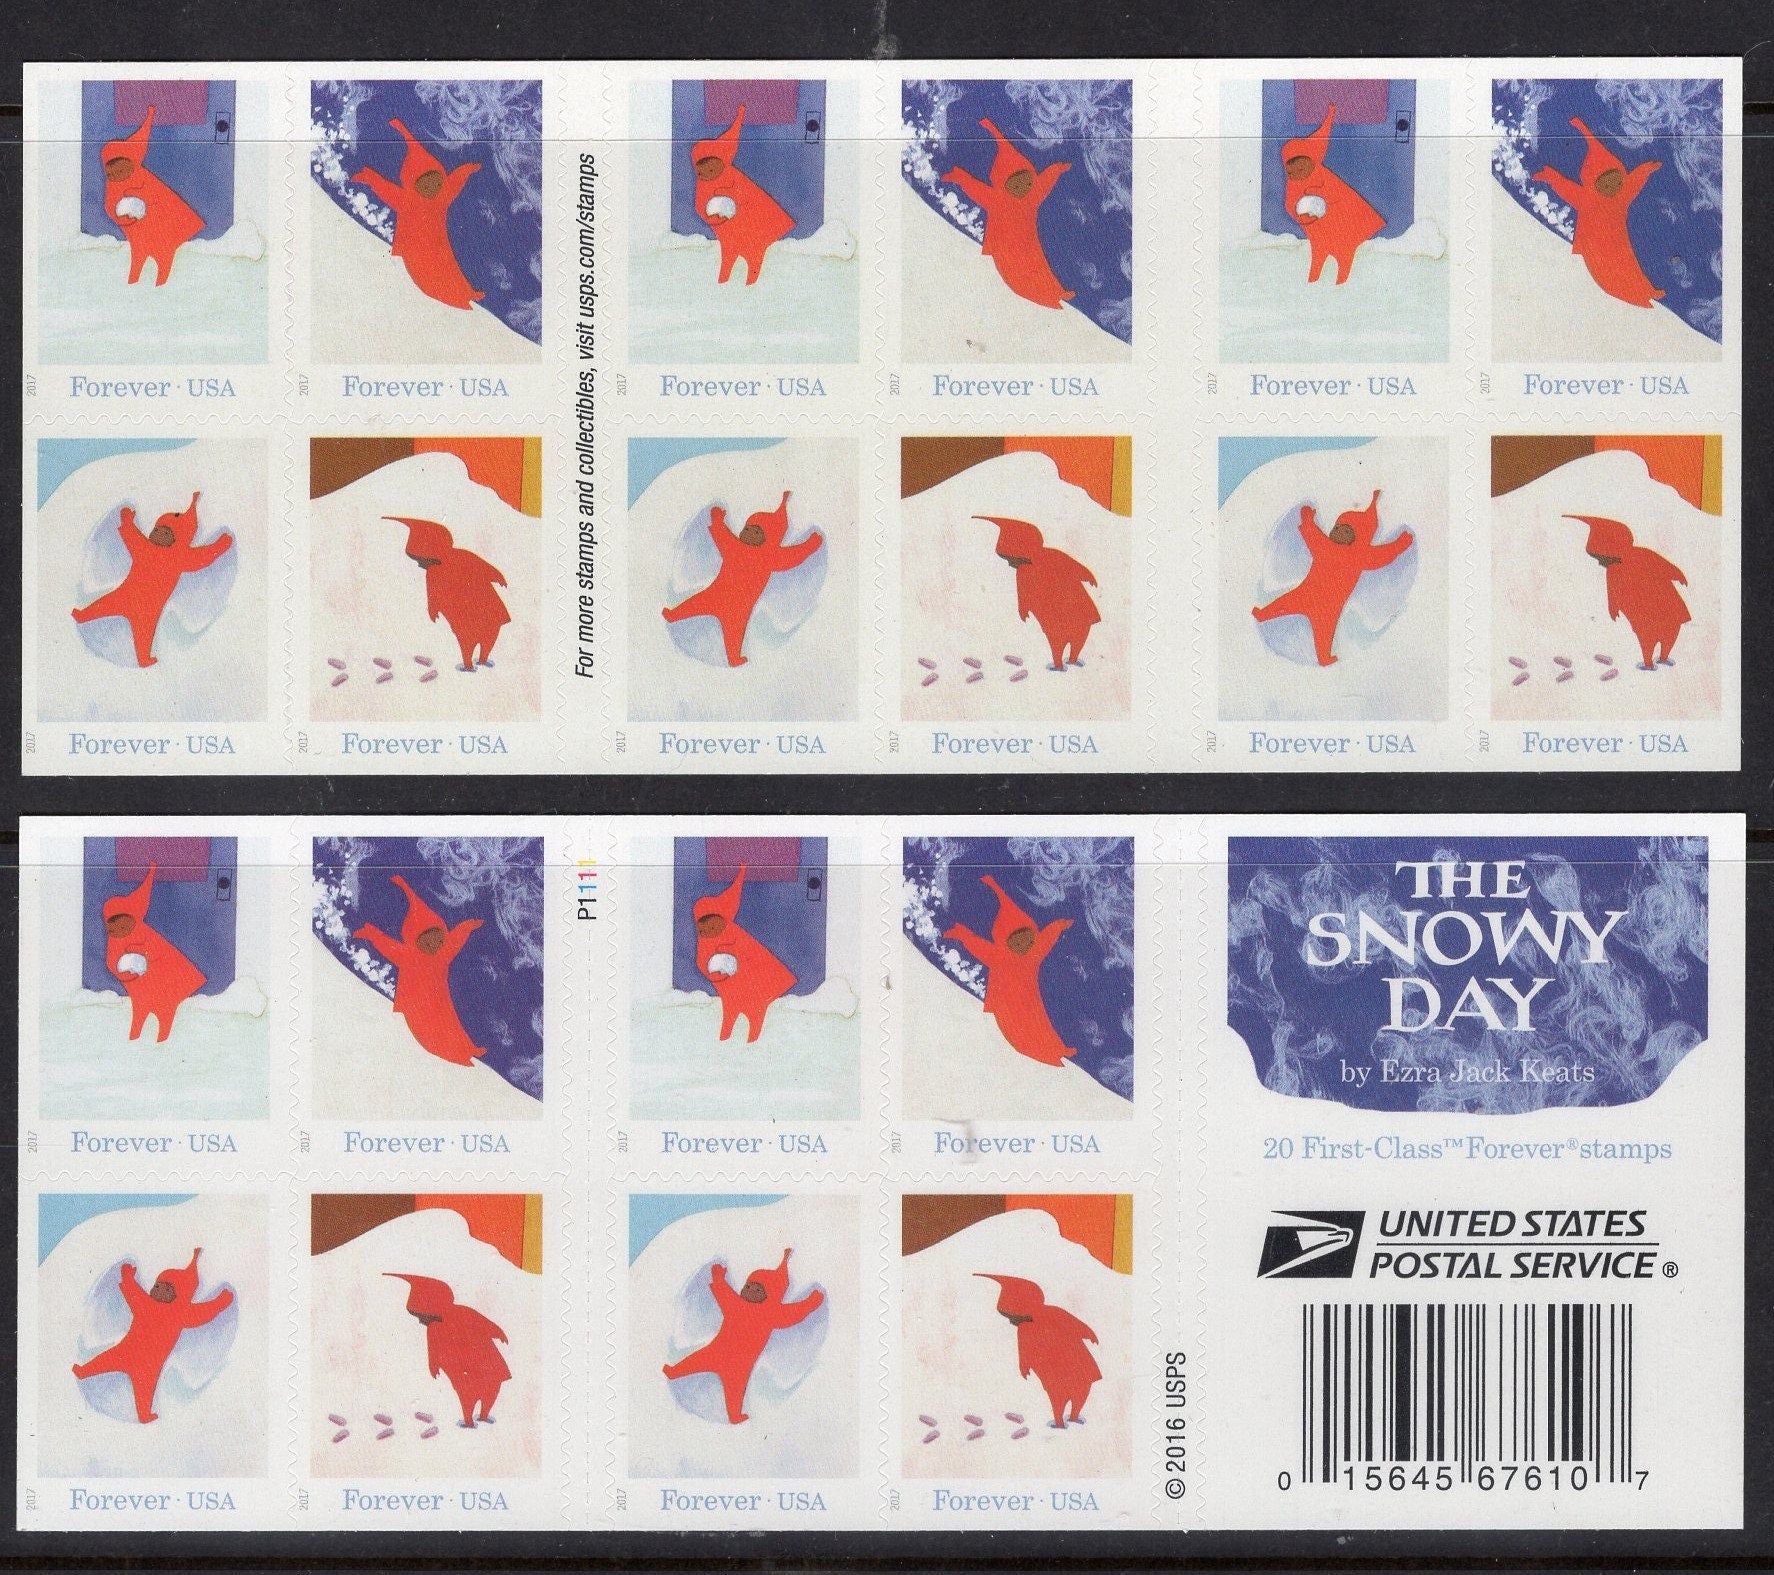 SNOWY DAY Booklet of 20 Winter Snow Holiday Christmas Postage Stamps - Bright Fresh Issued in 2017 s5246 -